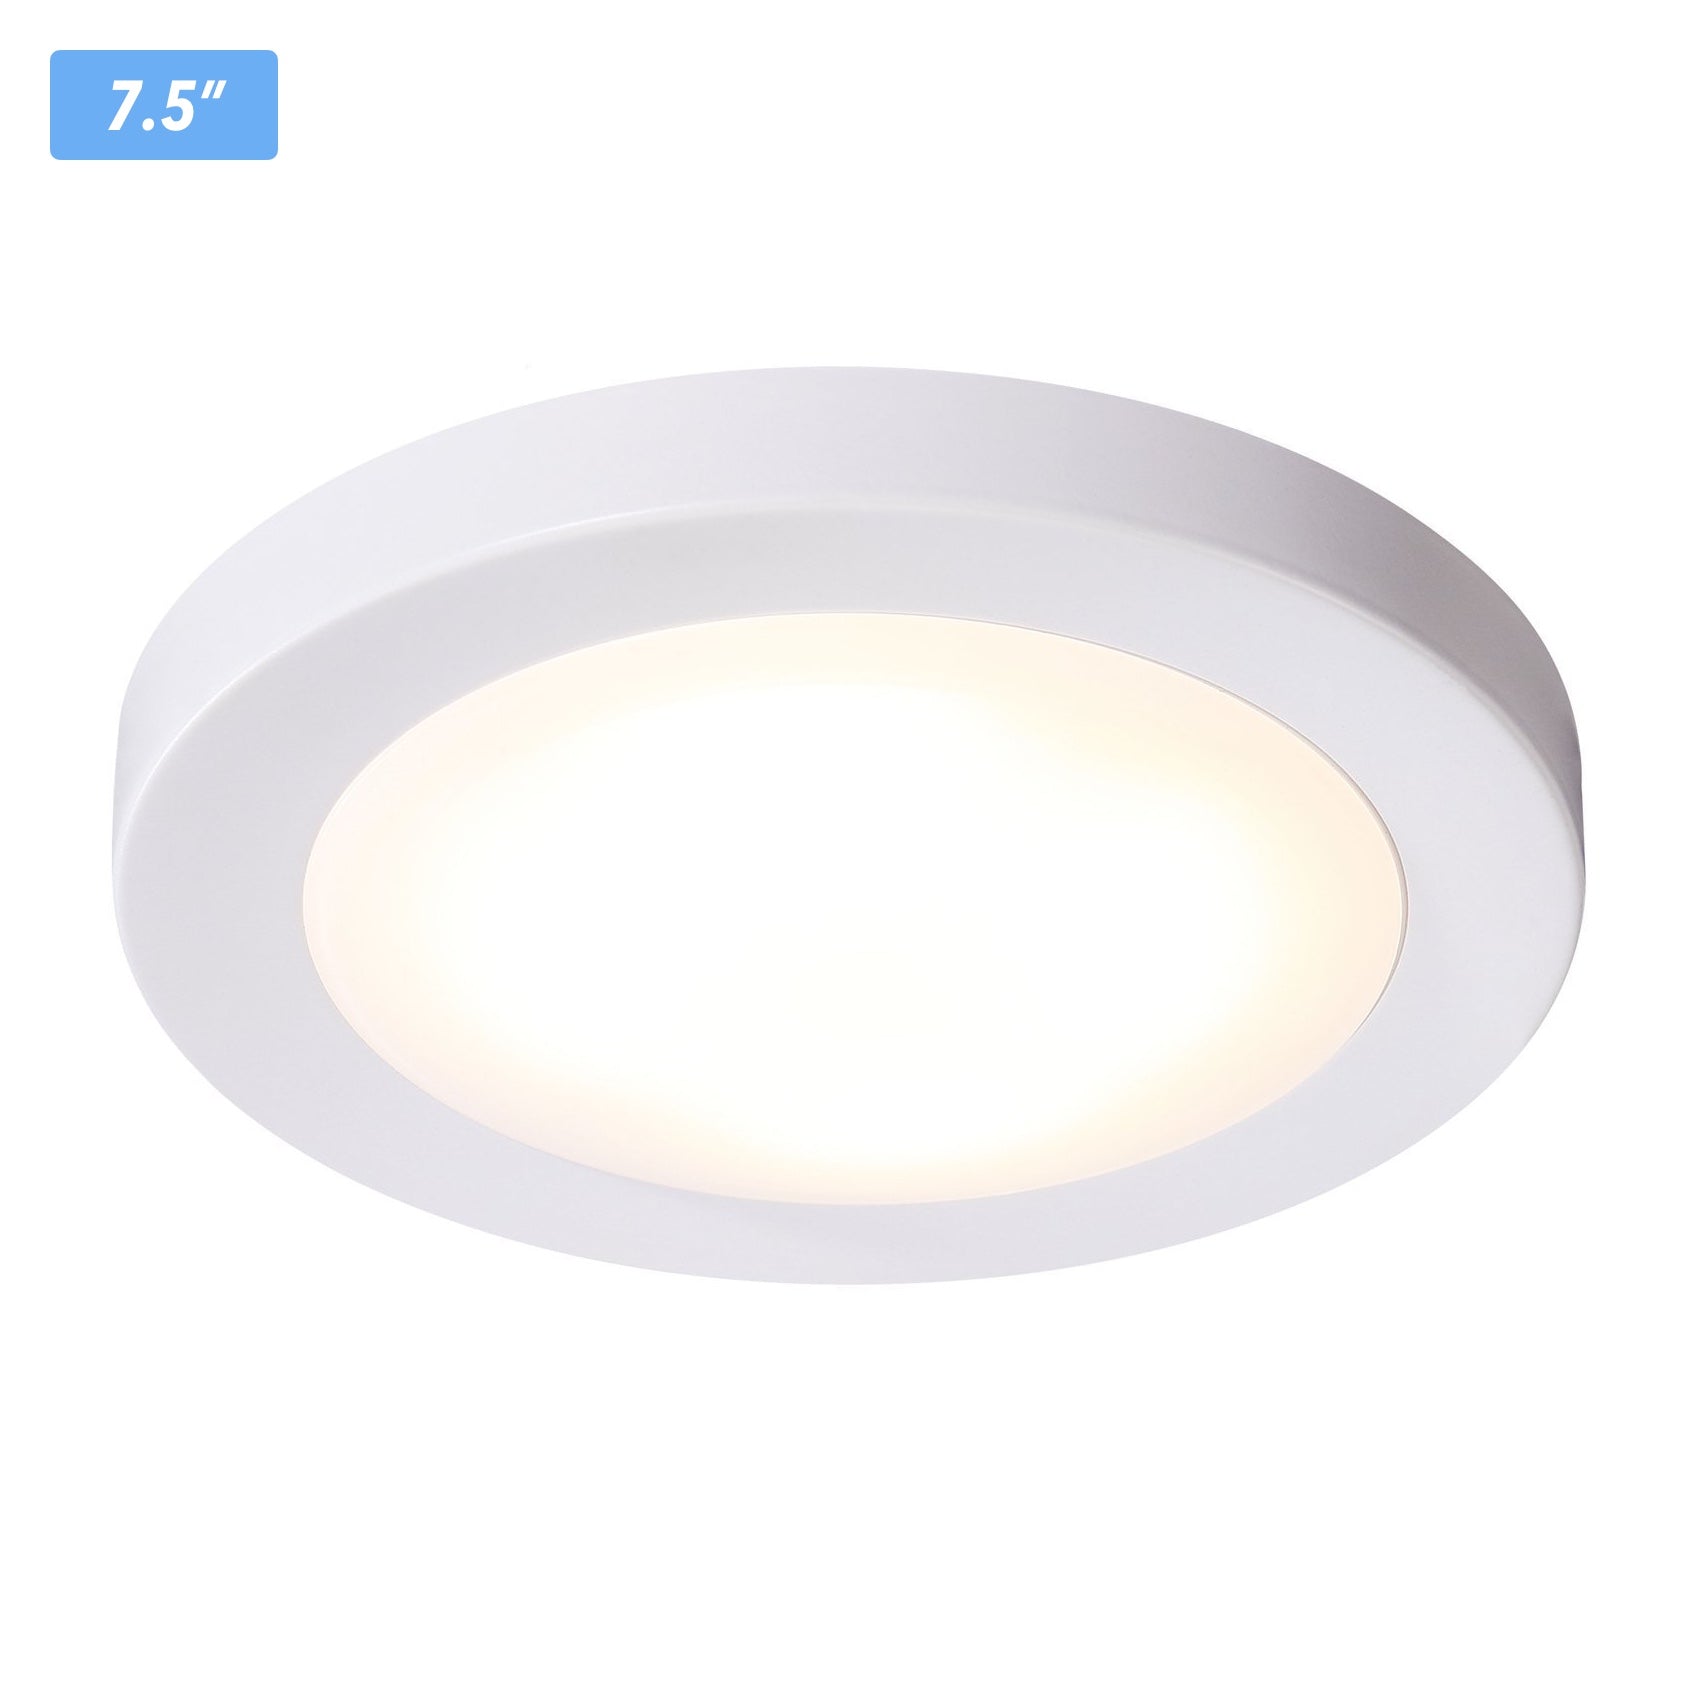 Flush Mount Ceiling Light 7 5 Inch Dimmable Led White Finish Wet Location 120v 12w 840lm